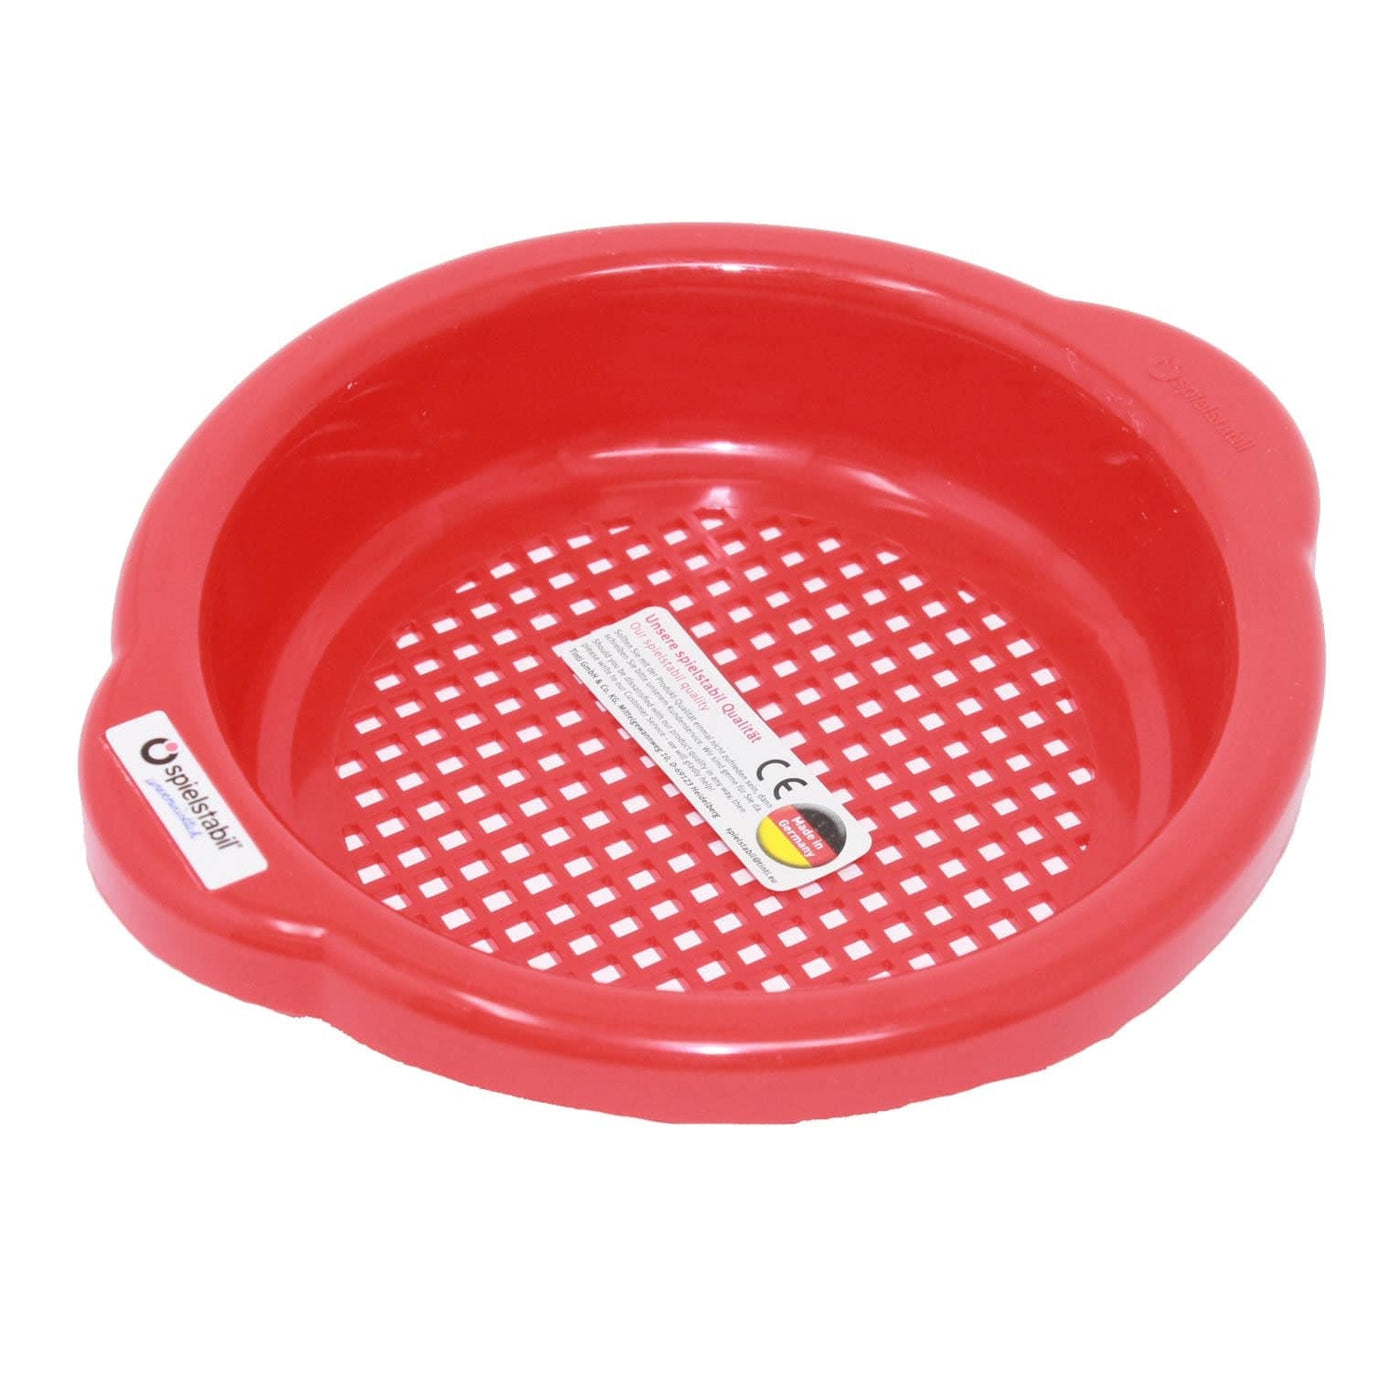 Sand Sieve Small (assorted colors) - HABA USA